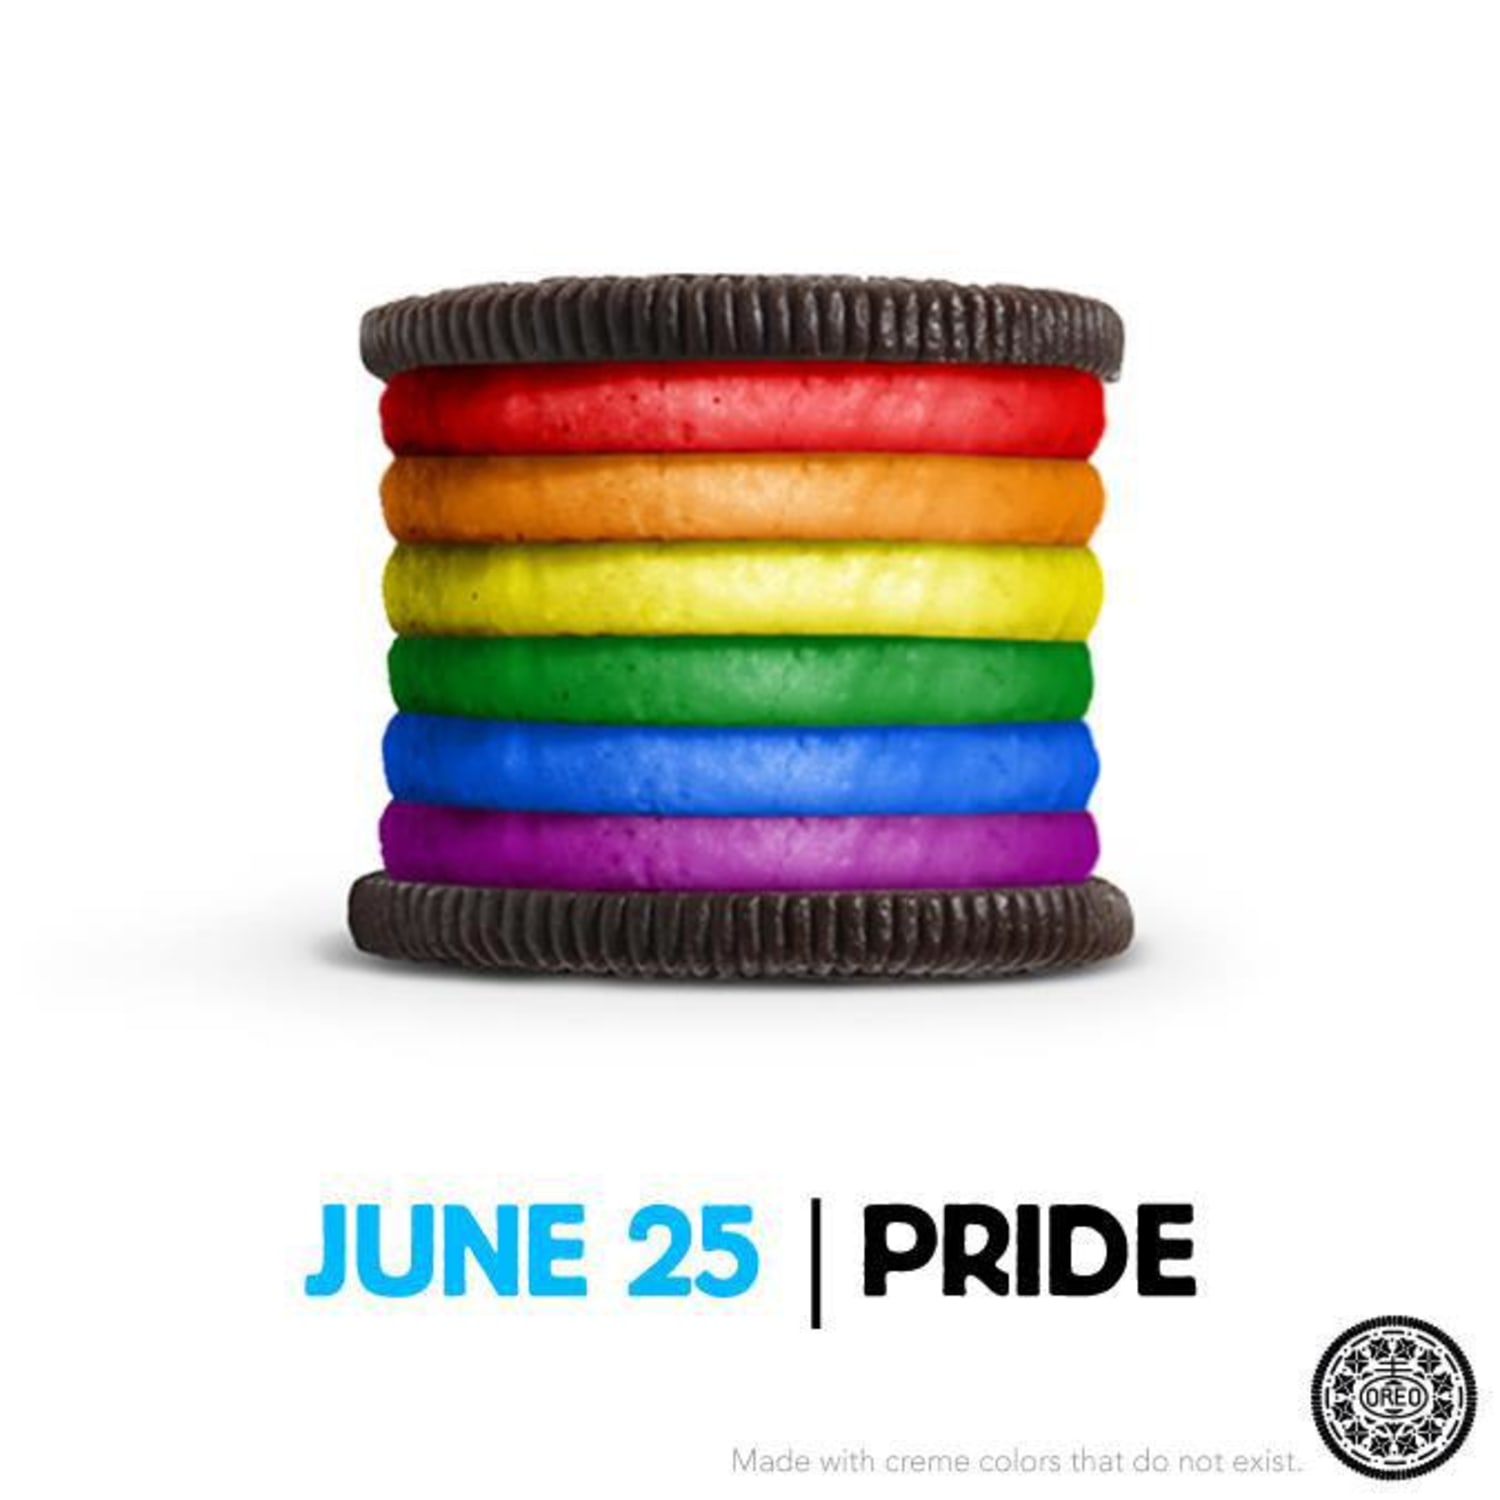 Oreo stacks up for LGBT Pride Month